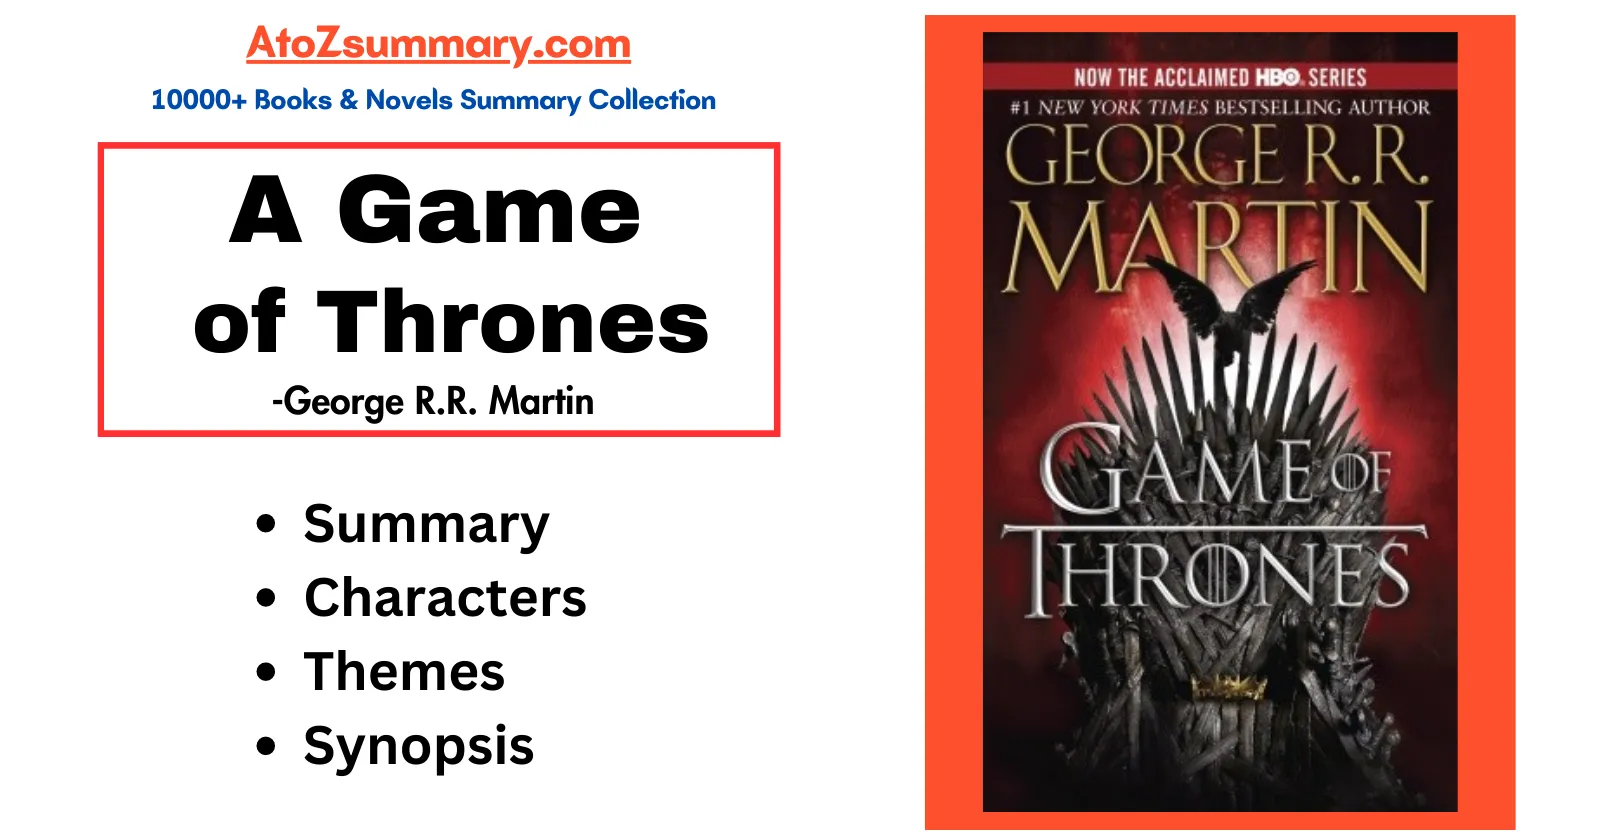 A Game of Thrones Summary,Themes,Characters & Synopsis [George R.R. Martin]